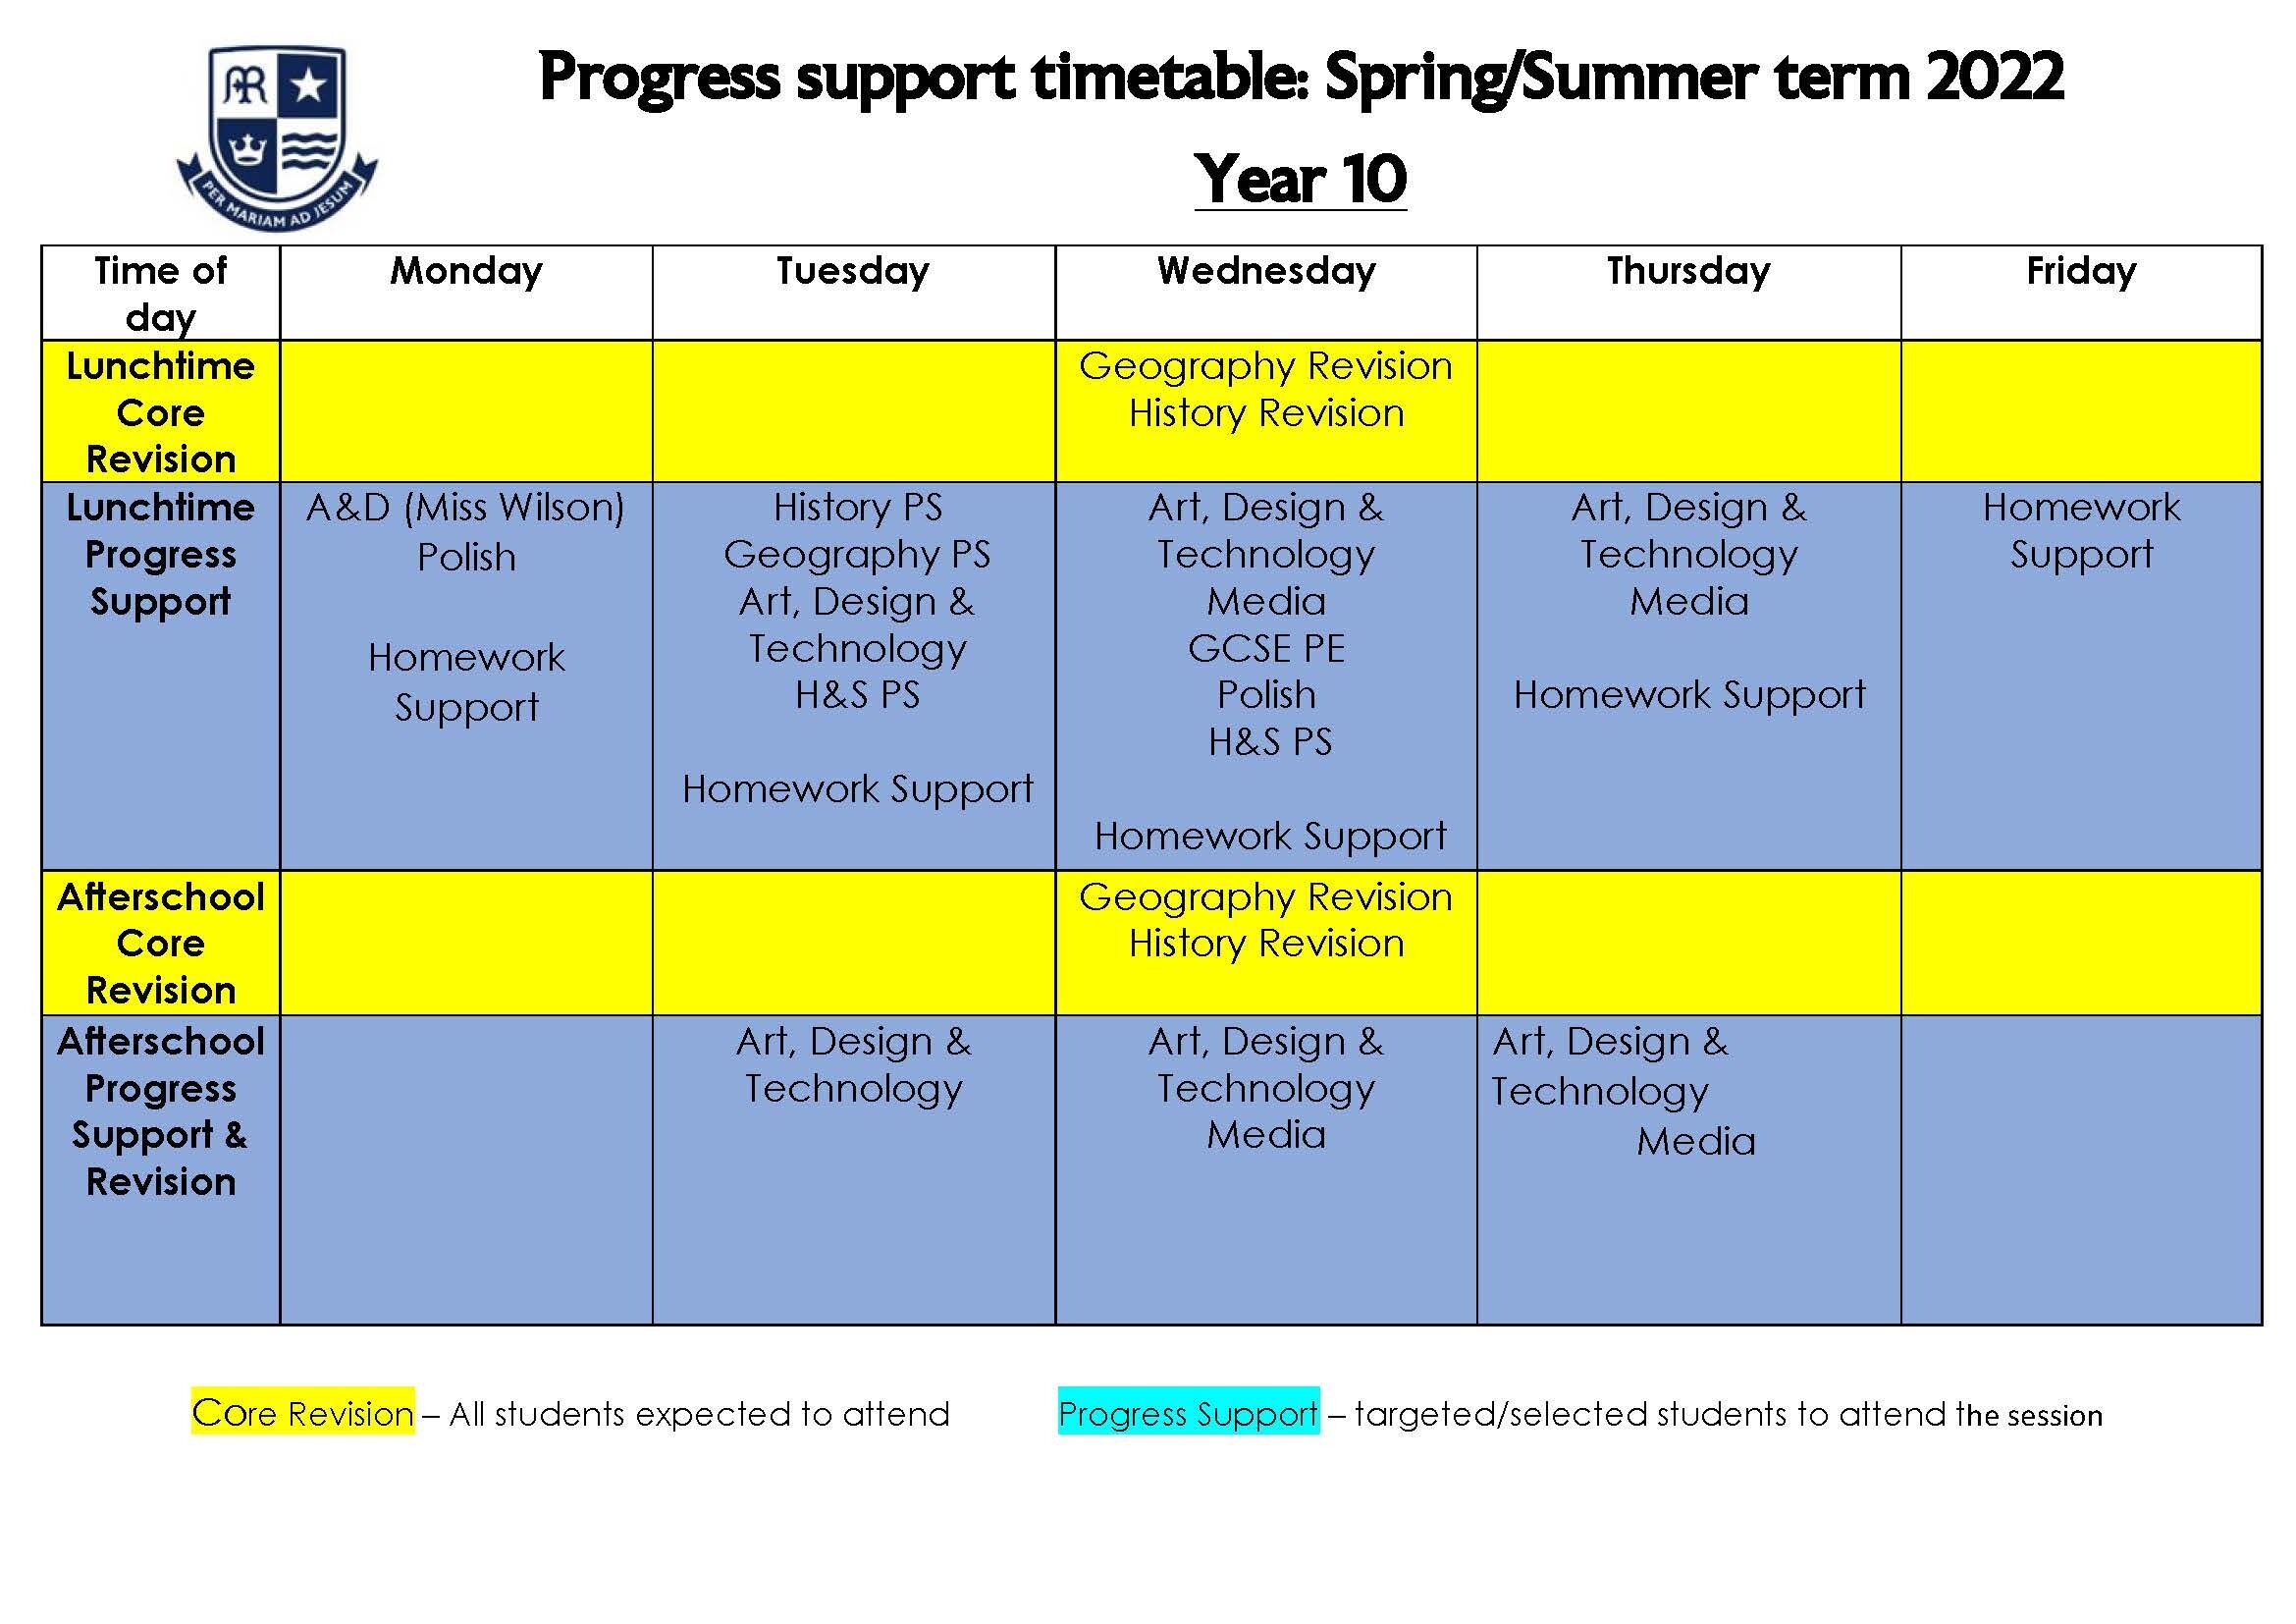 Progress Support Spring term 2022 Year 10